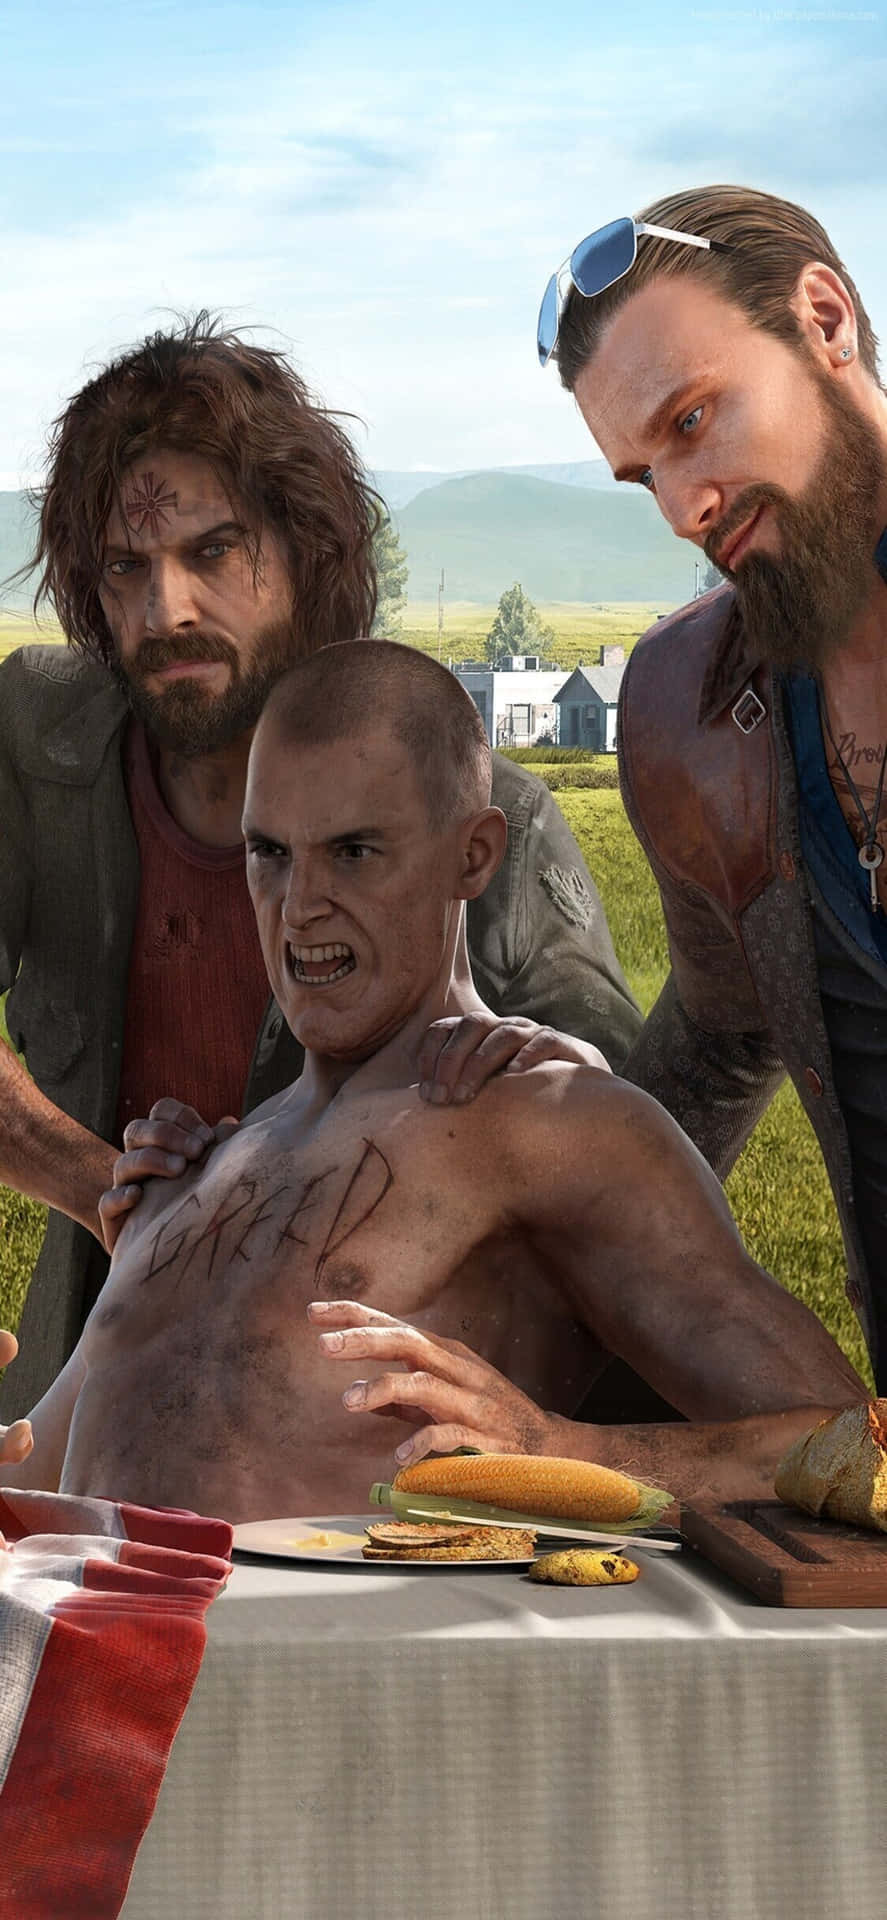 Enjoy Your Adventures with Iphone XS and Far Cry 5